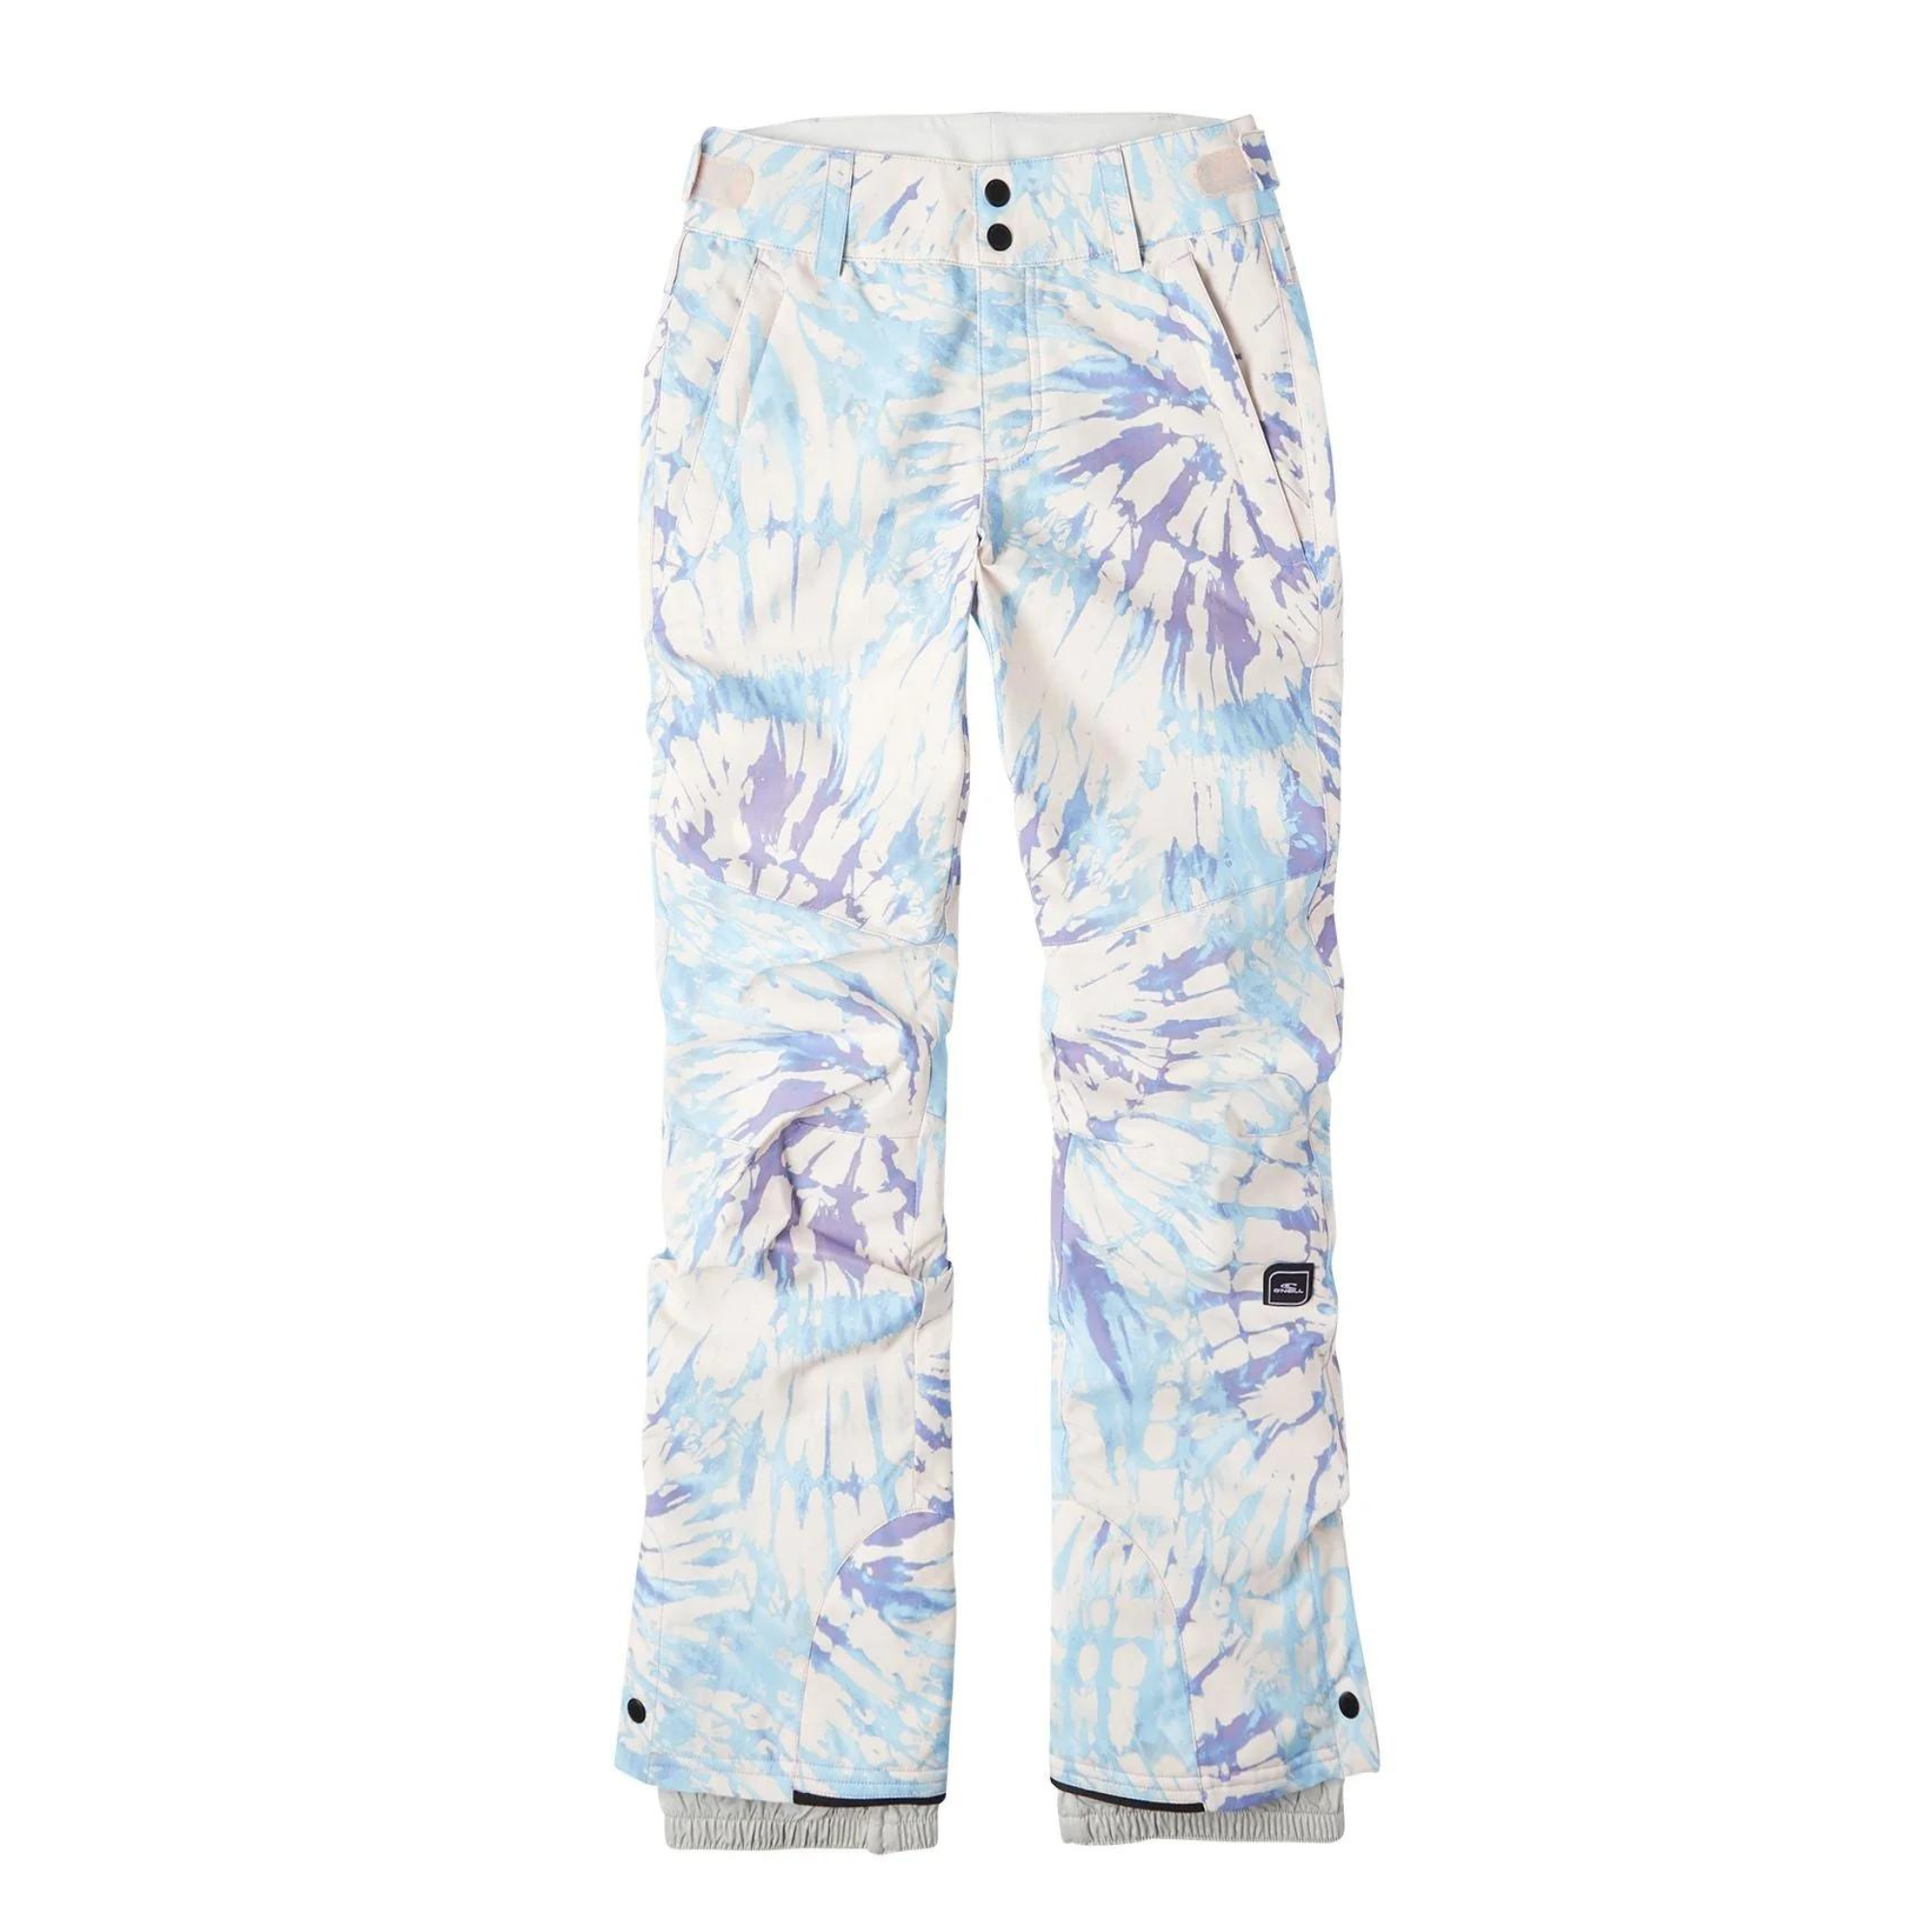 O'Neill Girl's Star Pant's - Pink Tie Dye